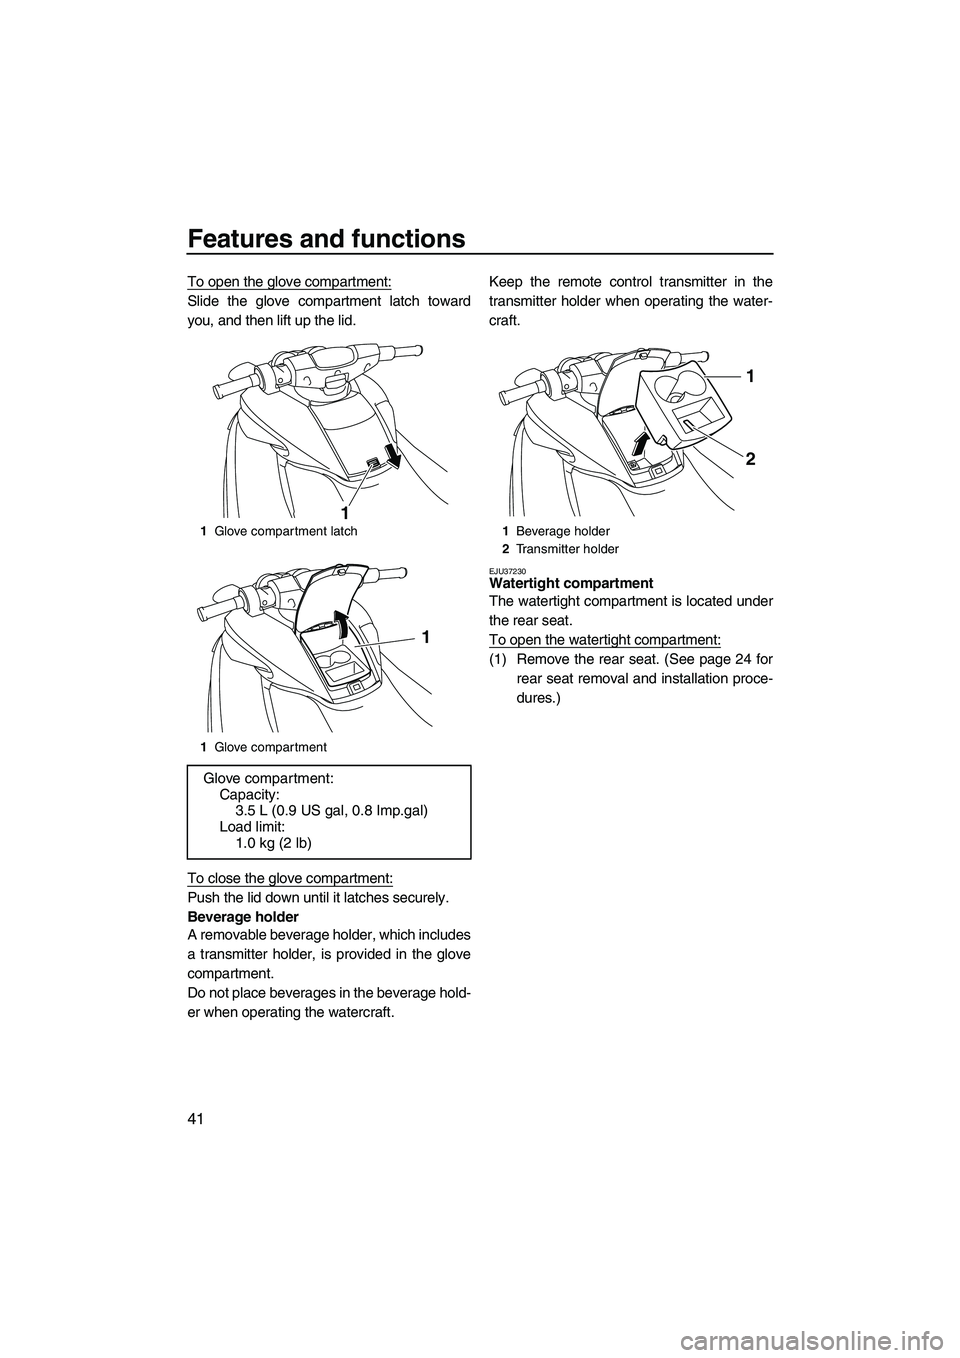 YAMAHA FZS SVHO 2009  Owners Manual Features and functions
41
To open the glove compartment:
Slide the glove compartment latch toward
you, and then lift up the lid.
To close the glove compartment:
Push the lid down until it latches secu